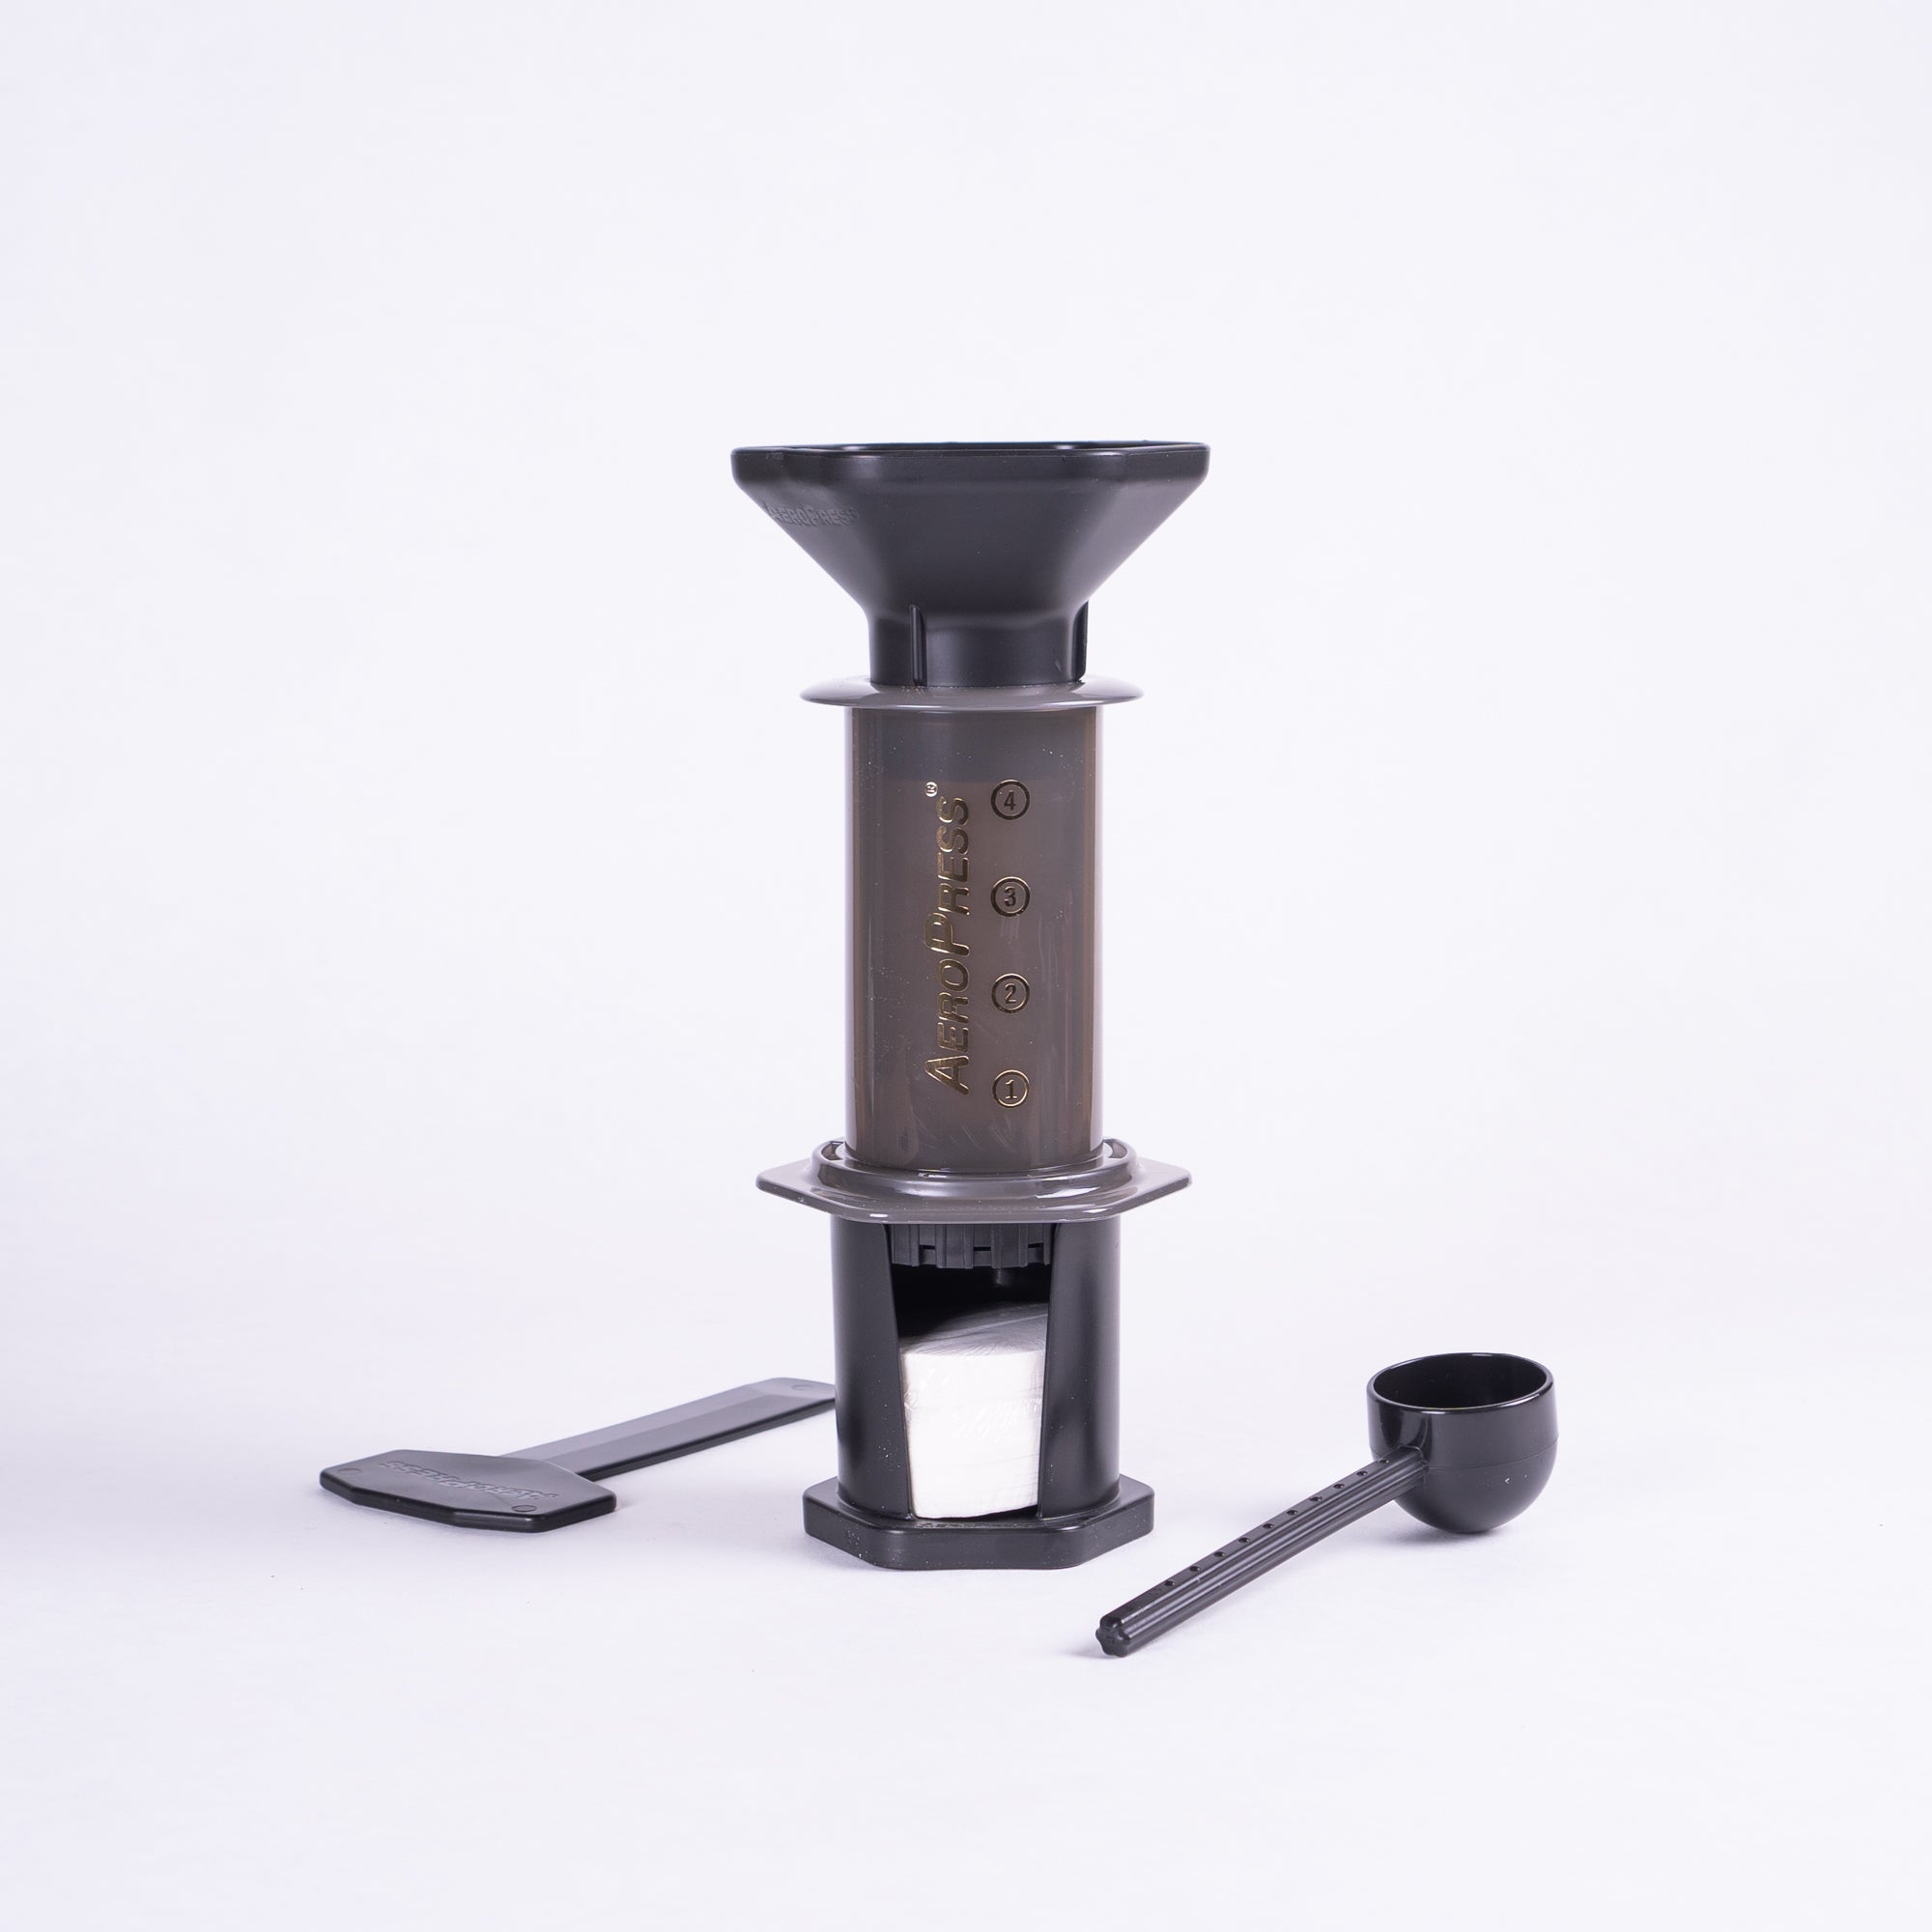 At AeroPress, we are committed to inspiring coffee lovers around the world to enhance their coffee experience. Our products are designed in Silicon Valley and manufactured in the USA using BPA- and phthalate-free materials, ensuring both quality and safety. Elevate your coffee game with the AeroPress Original and make every brew a truly satisfying one.